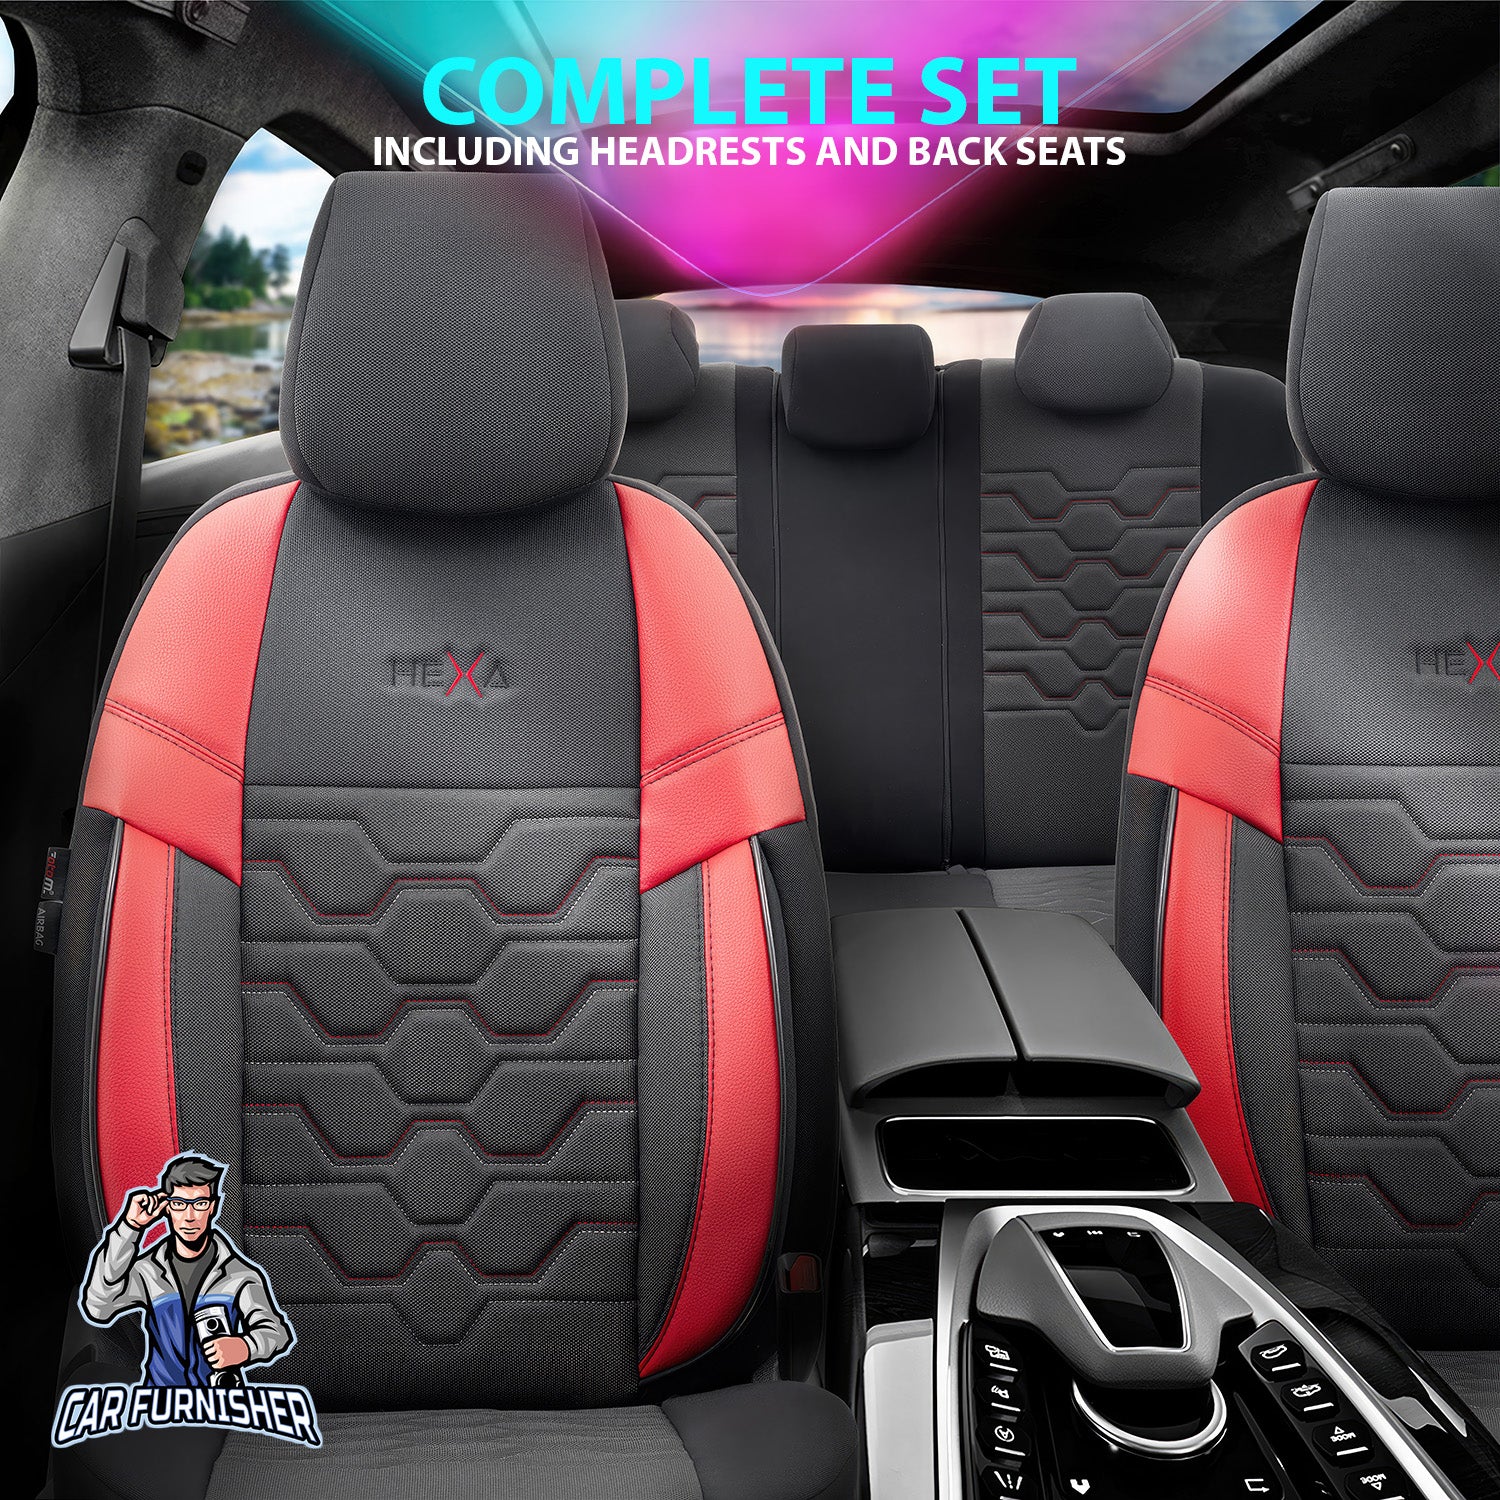 Car Seat Cover Set - Hexa Design Red 5 Seats + Headrests (Full Set) Leather & Jacquard Fabric